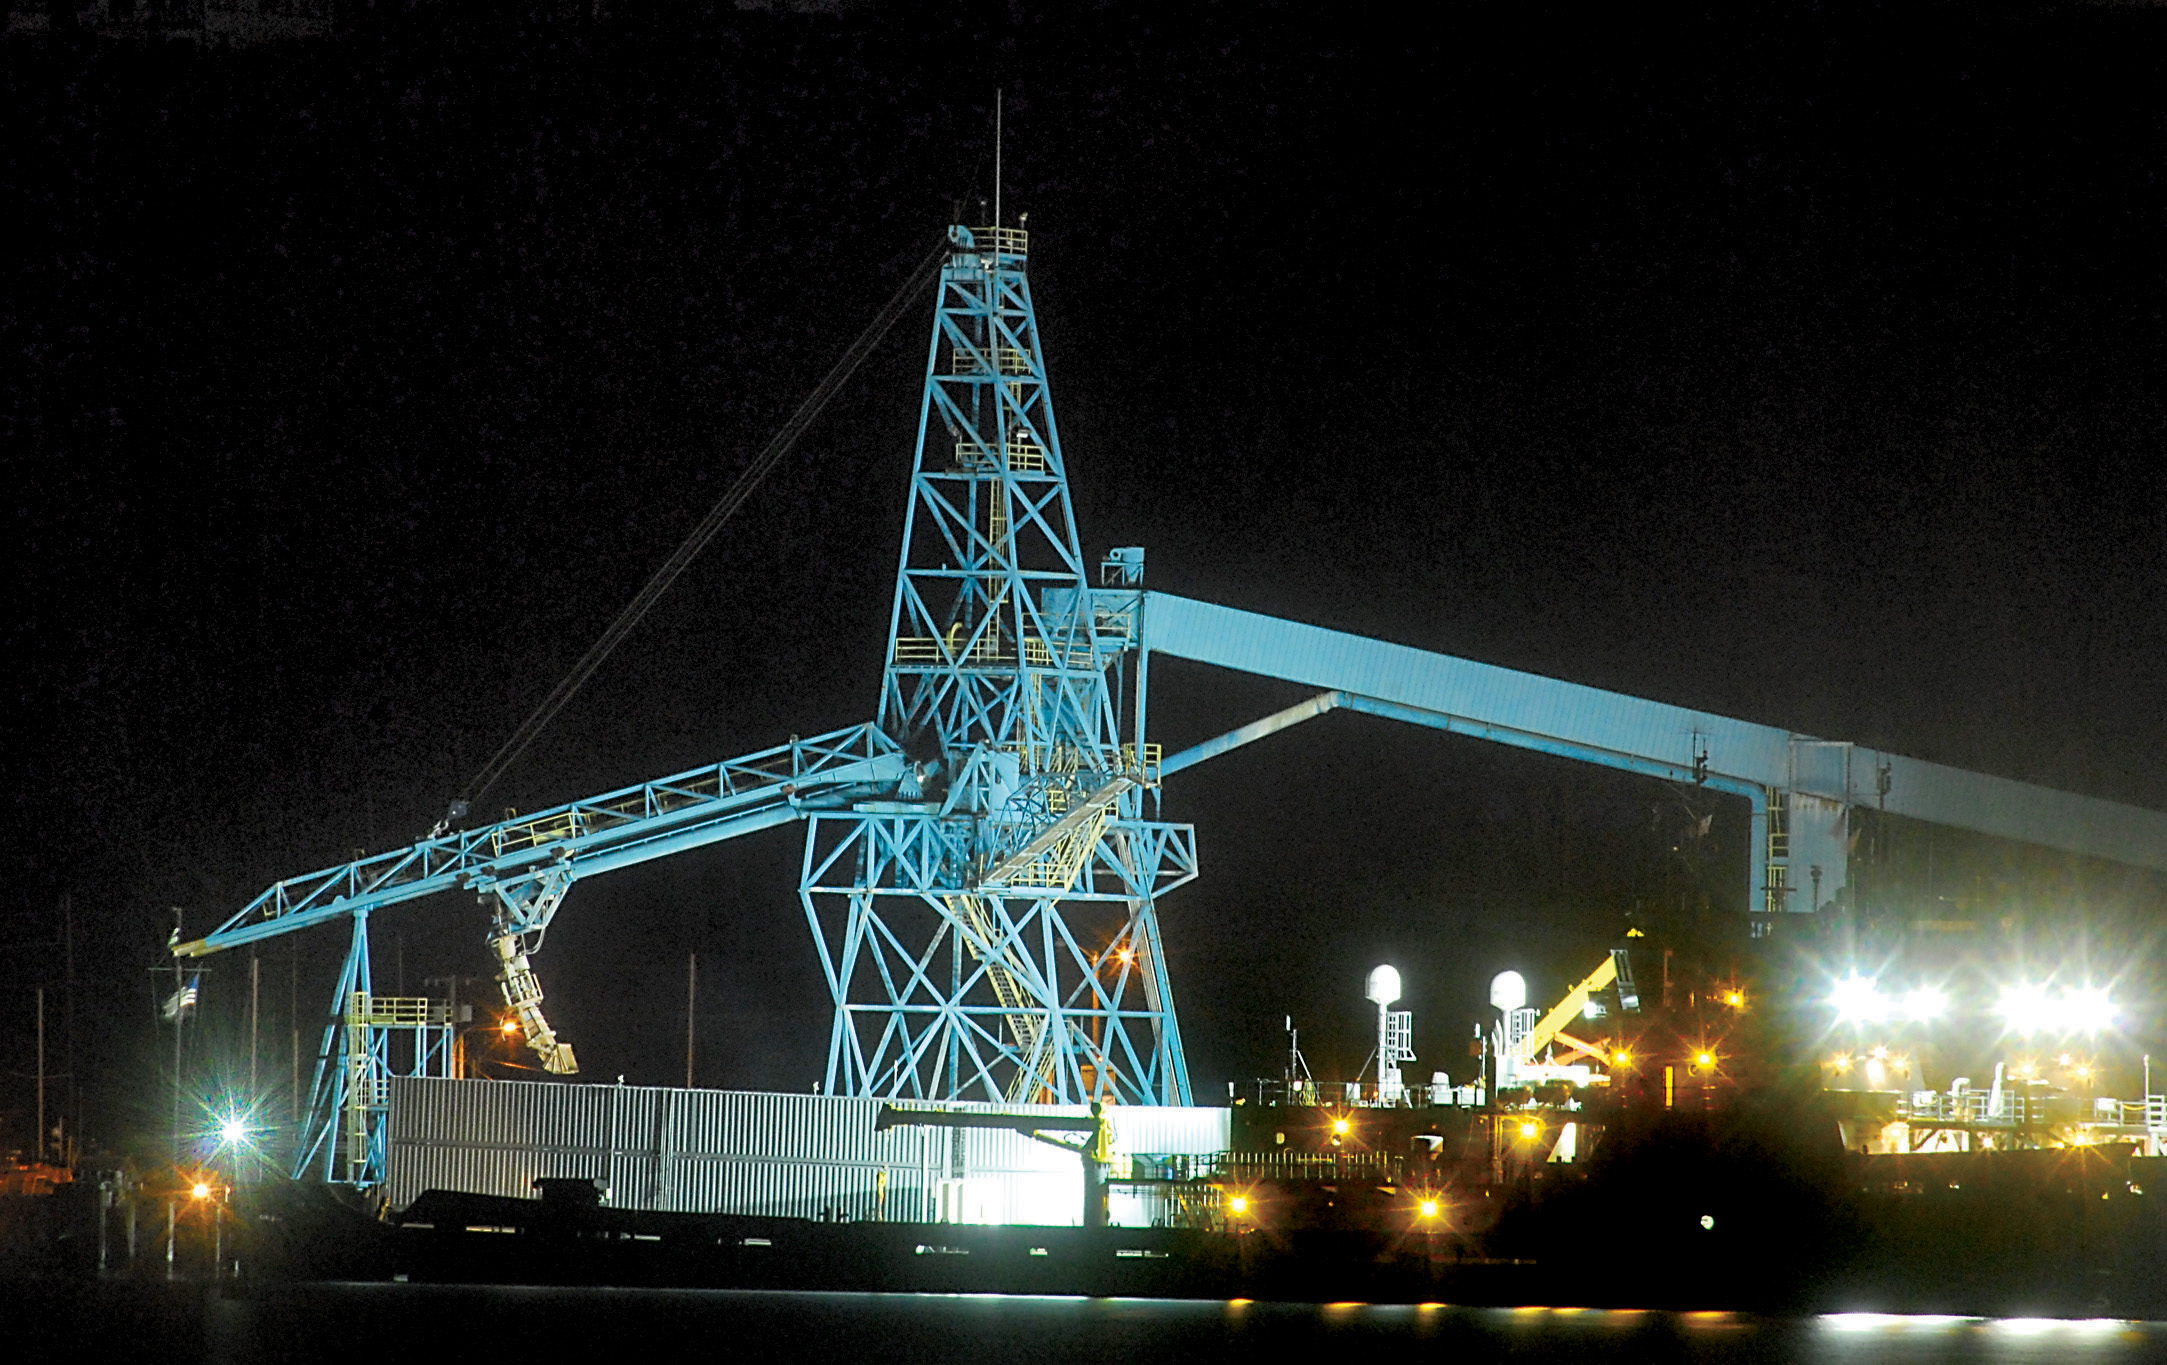 The chip loader at the Port of Port Angeles Terminal 7 on Port Angeles Harbor is illuminated in this 2011 file photo. — Keith Thorpe/Peninsula Daily News